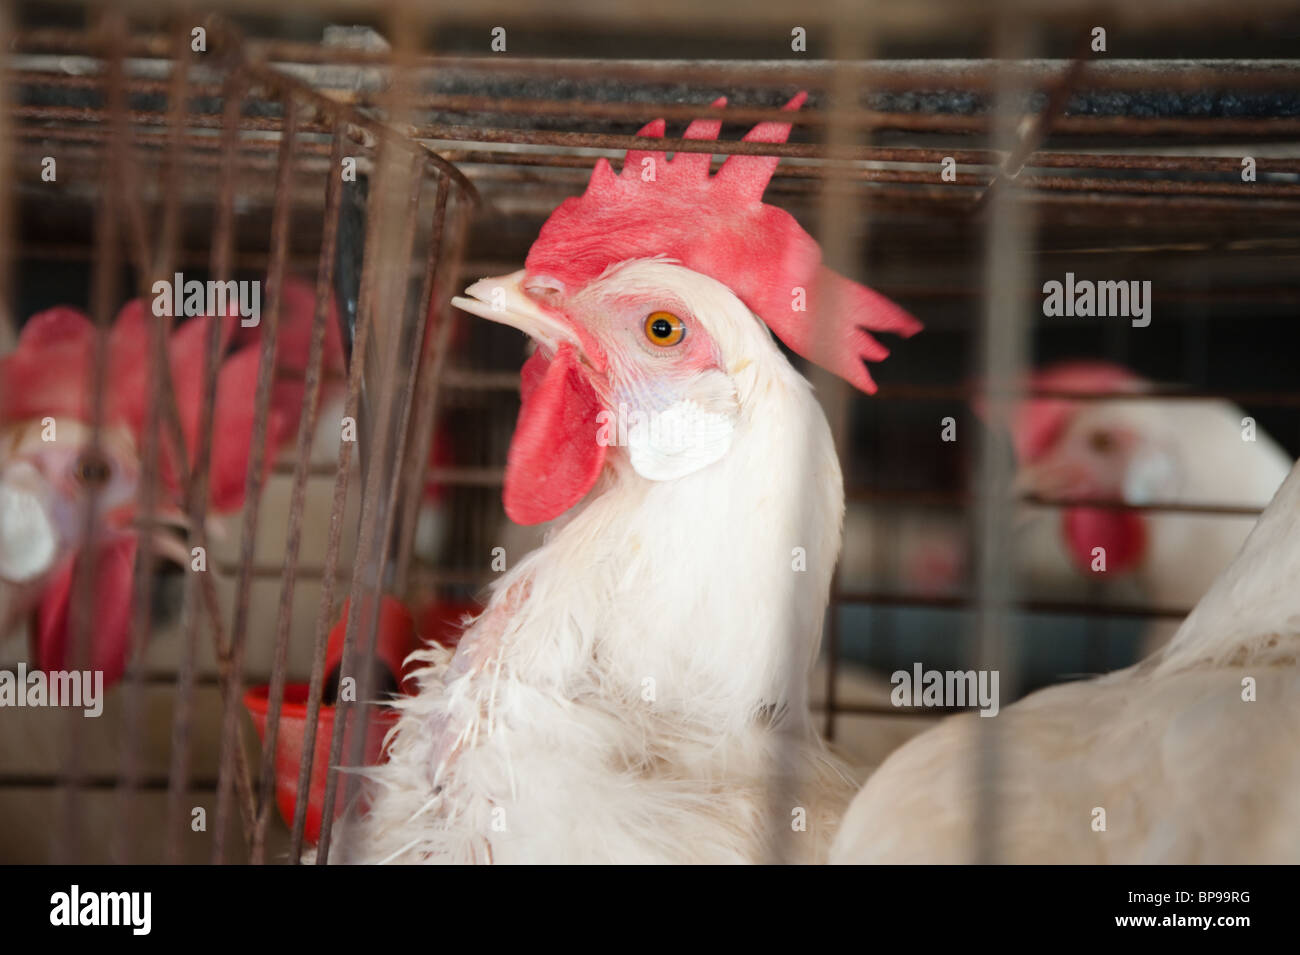 White Leghorn egg-laying chickens in cages in their hen house. Stock Photo